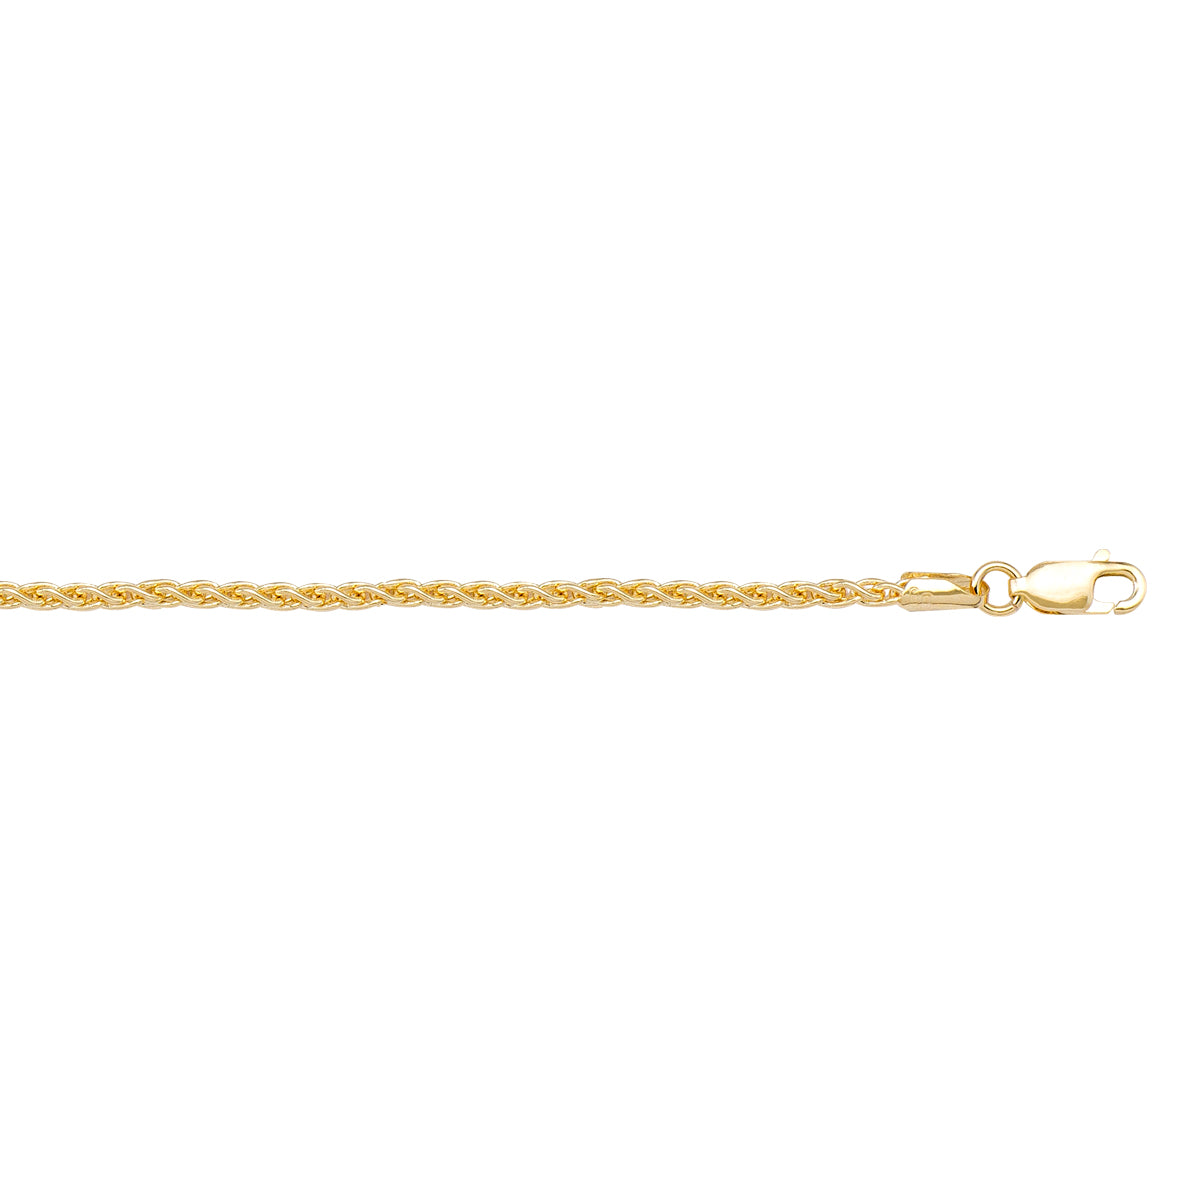 GOLD CHAIN YELLOW GOLD SOLID ROUND WHEAT LINK 